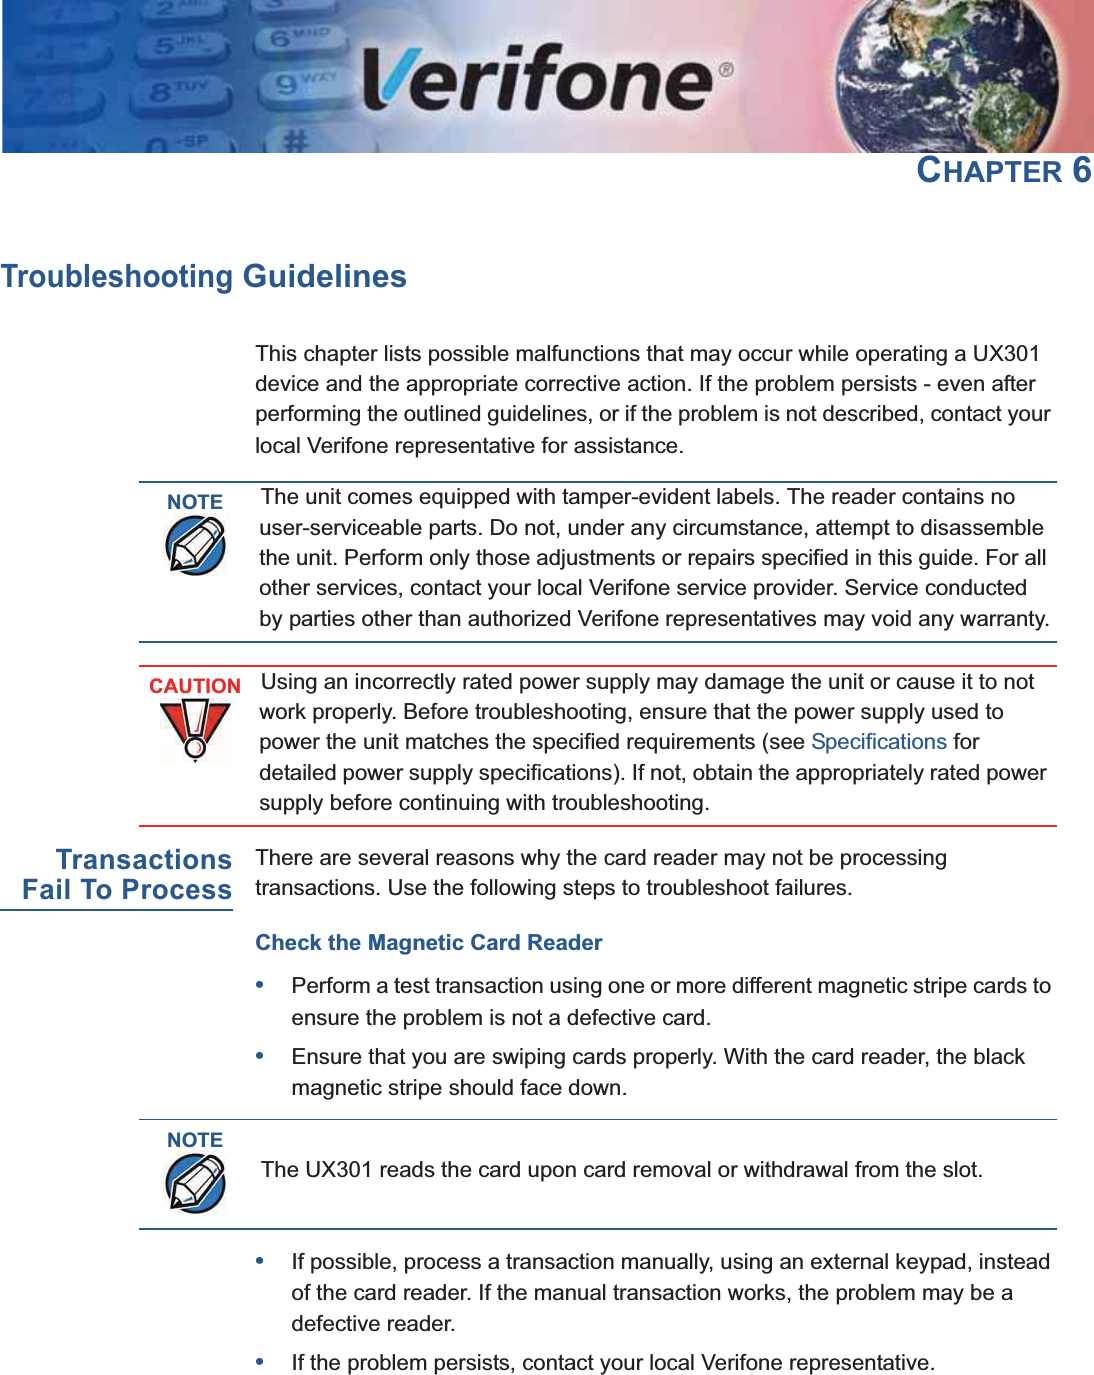 UX301 INSTALLATION GUIDE 35CHAPTER 6Troubleshooting GuidelinesThis chapter lists possible malfunctions that may occur while operating a UX301 device and the appropriate corrective action. If the problem persists - even after performing the outlined guidelines, or if the problem is not described, contact your local Verifone representative for assistance.TransactionsFail To ProcessThere are several reasons why the card reader may not be processing transactions. Use the following steps to troubleshoot failures.Check the Magnetic Card Reader•Perform a test transaction using one or more different magnetic stripe cards to ensure the problem is not a defective card.•Ensure that you are swiping cards properly. With the card reader, the black magnetic stripe should face down.•If possible, process a transaction manually, using an external keypad, instead of the card reader. If the manual transaction works, the problem may be a defective reader.•If the problem persists, contact your local Verifone representative.NOTEThe unit comes equipped with tamper-evident labels. The reader contains no user-serviceable parts. Do not, under any circumstance, attempt to disassemble the unit. Perform only those adjustments or repairs specified in this guide. For all other services, contact your local Verifone service provider. Service conducted by parties other than authorized Verifone representatives may void any warranty.CAUTIONUsing an incorrectly rated power supply may damage the unit or cause it to not work properly. Before troubleshooting, ensure that the power supply used to power the unit matches the specified requirements (see Specifications for detailed power supply specifications). If not, obtain the appropriately rated power supply before continuing with troubleshooting.NOTEThe UX301 reads the card upon card removal or withdrawal from the slot.